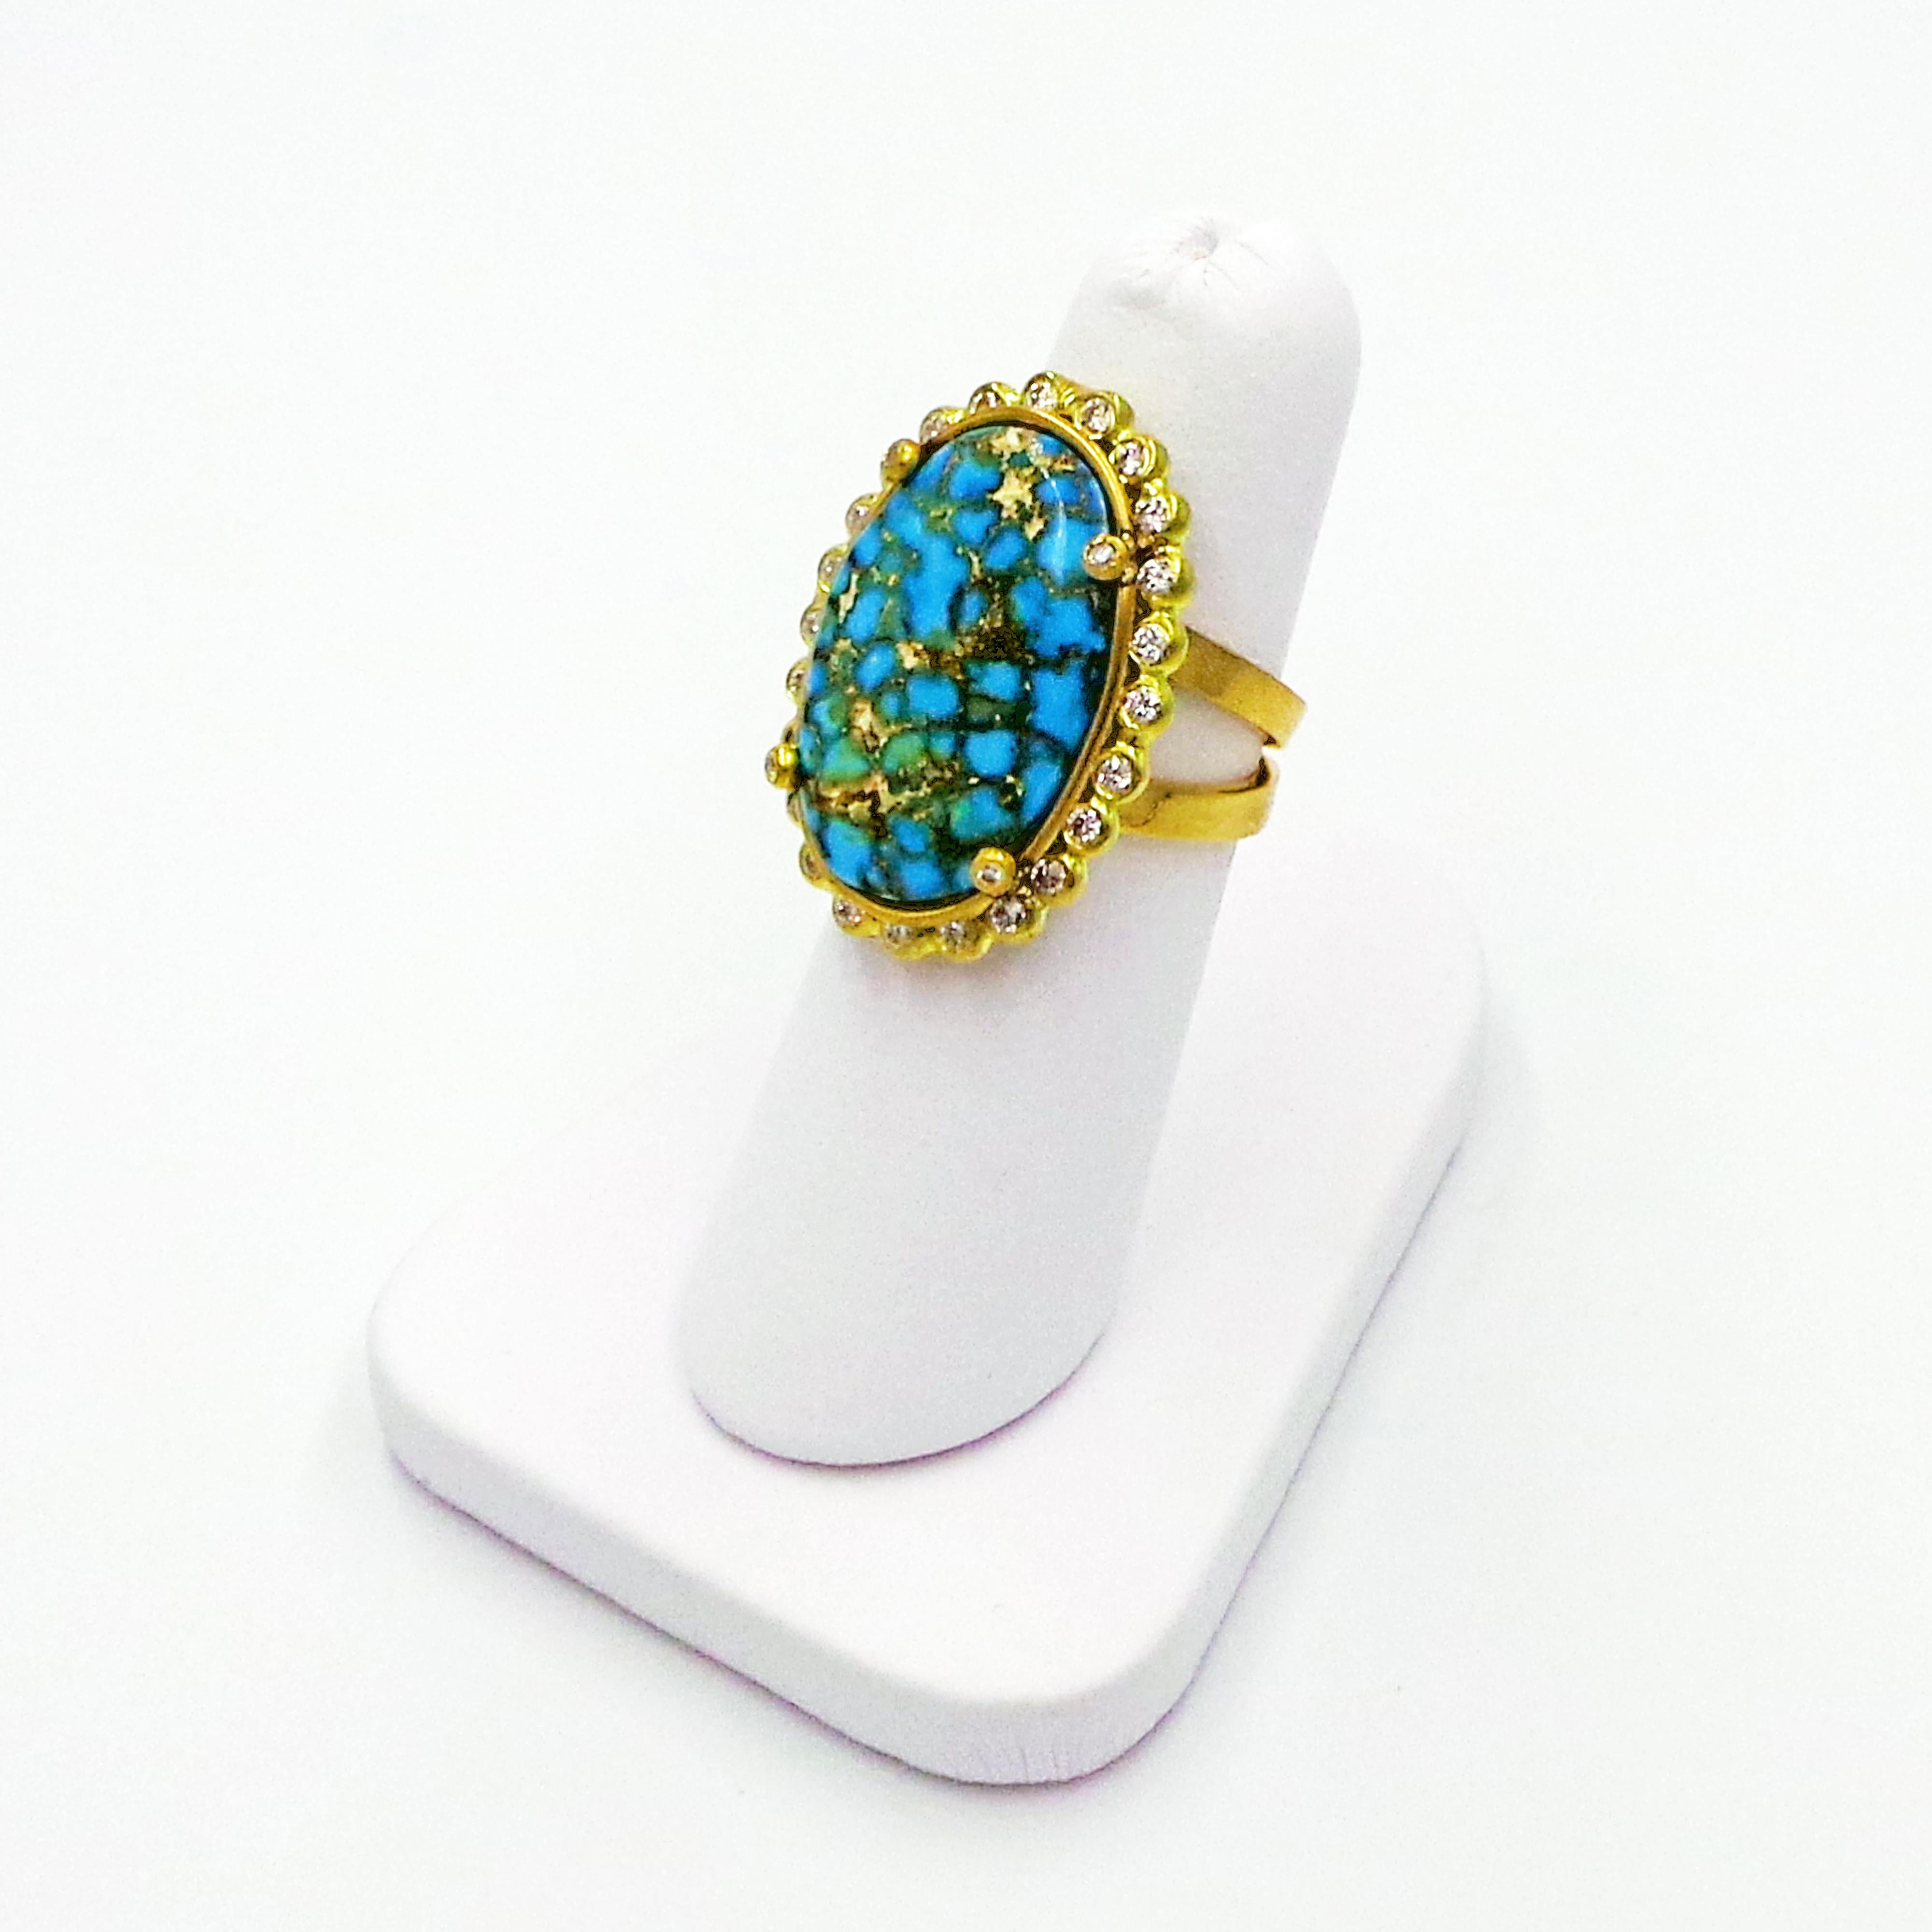 Women's 17.5 Carat Turquoise Mountain Gem and Diamond Halo Hand-Forged 22k Gold Ring